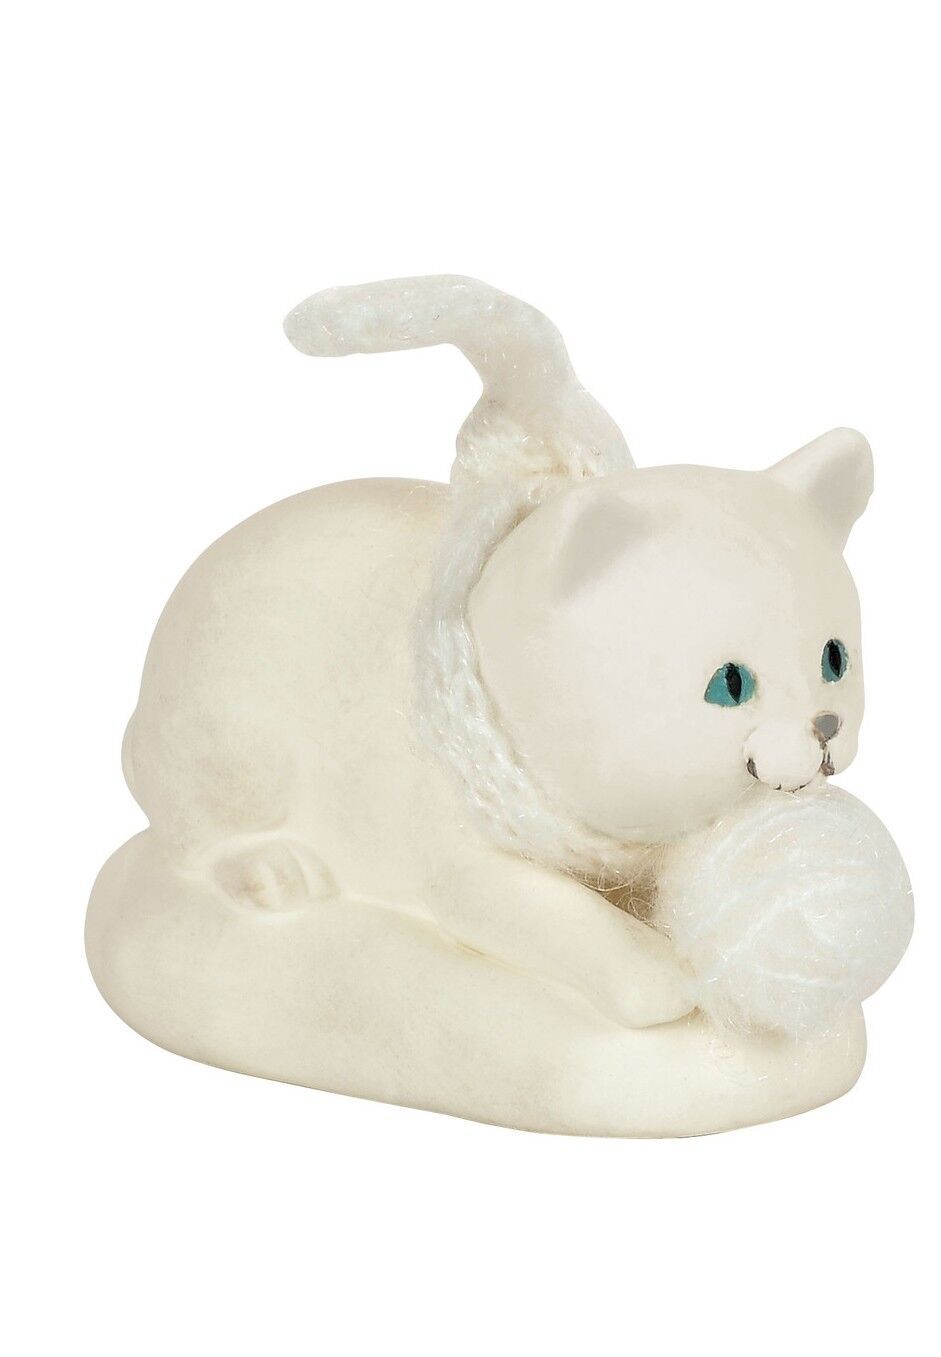 Primary image for Department 56 Snowbabies Cat Playing with Yarn Laying Bisque Porcelain White